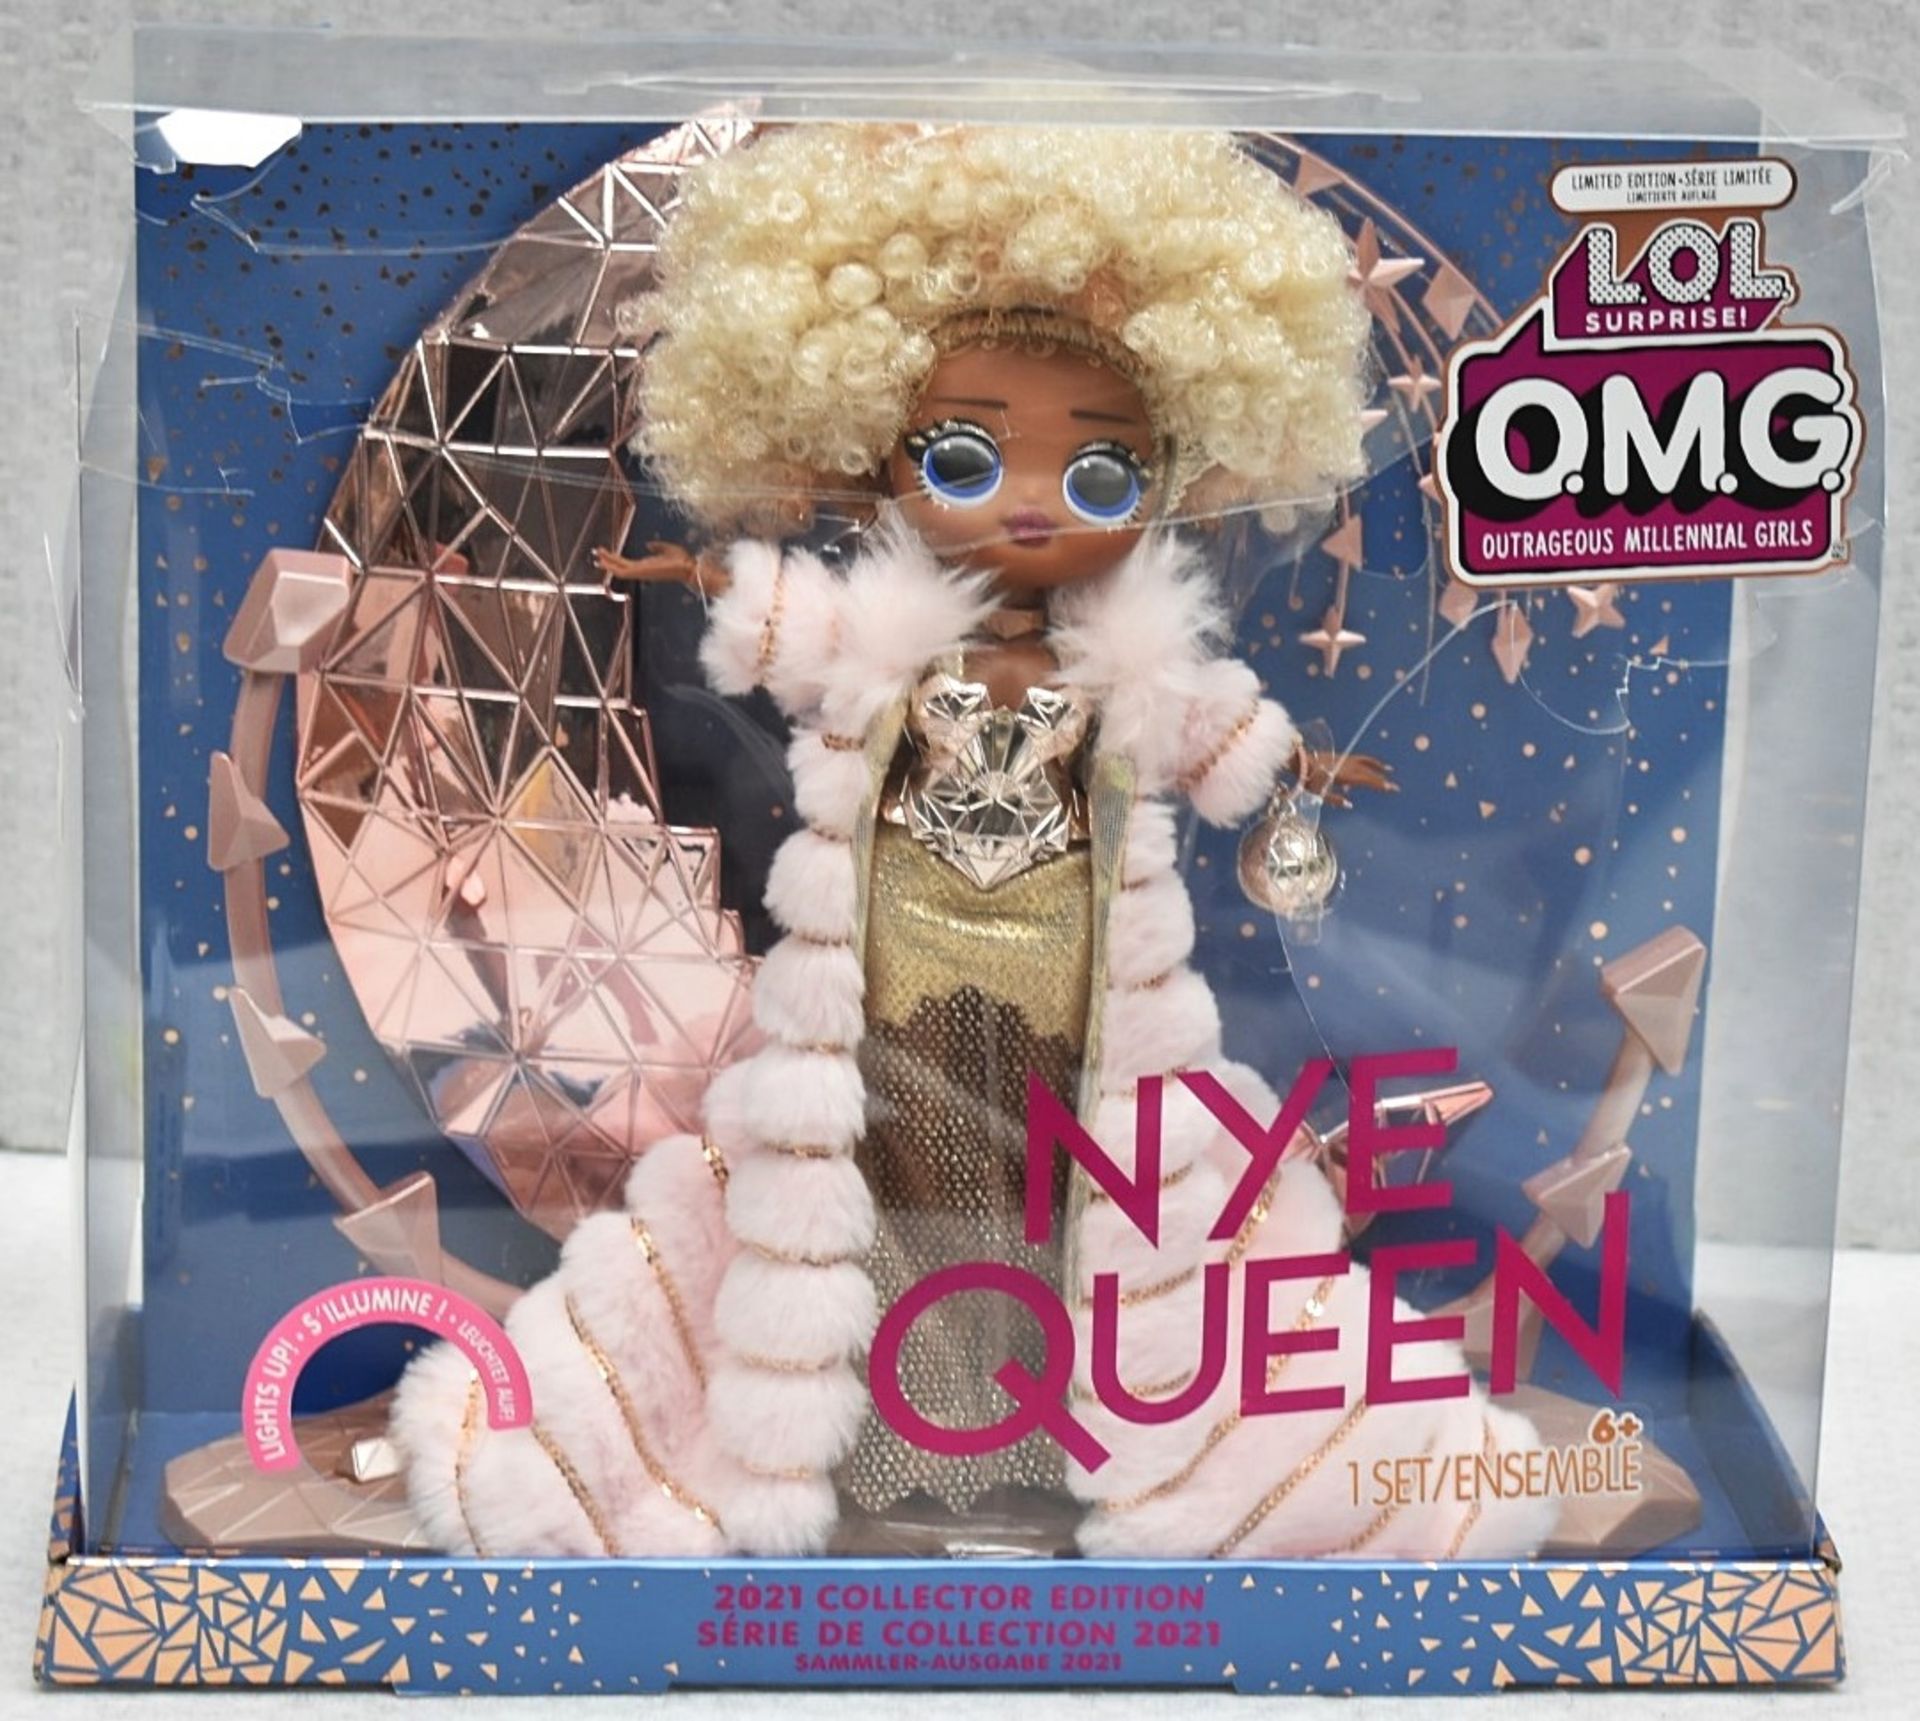 1 x L.O.L Surprise! Holiday OMG 2021 Collector NYE Queen Fashion Doll - Original Price £57.99 -